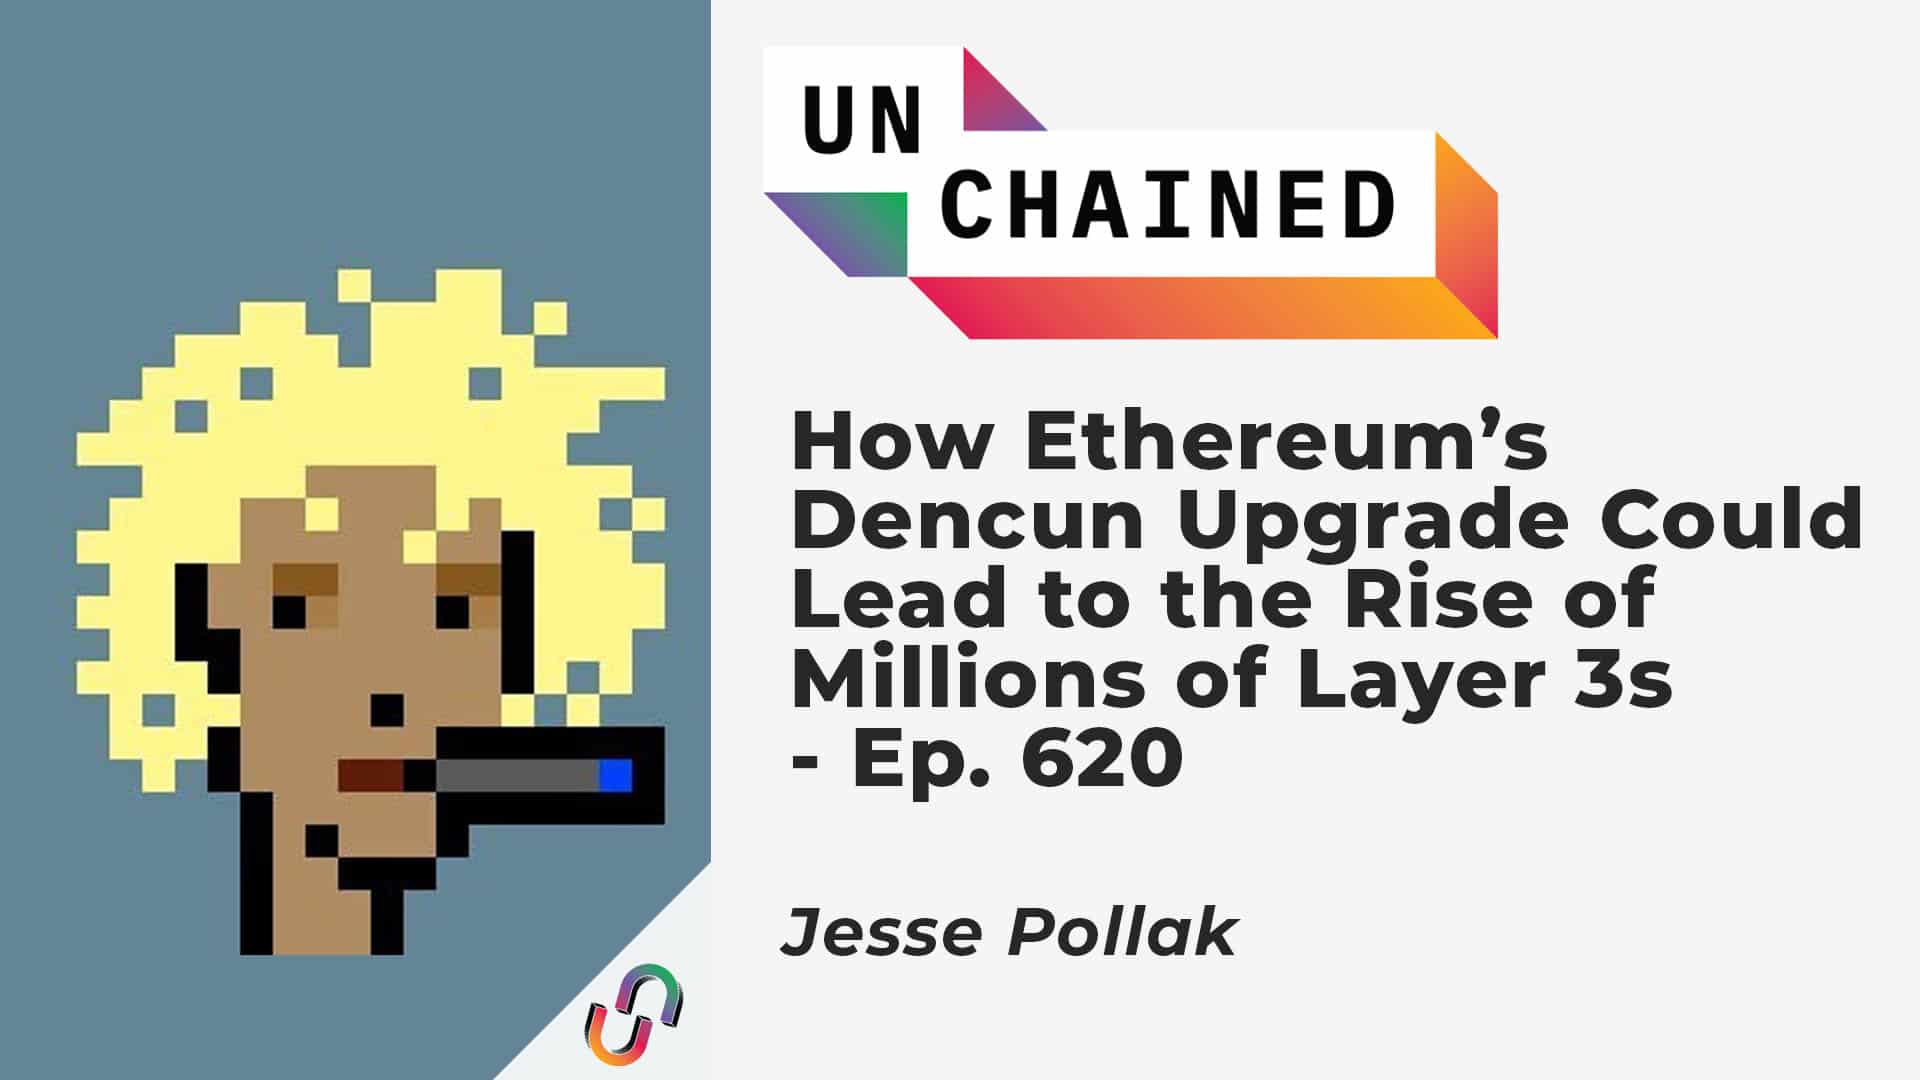 How Ethereum’s Dencun Upgrade Could Lead to the Rise of Millions of Layer 3s - Ep. 620